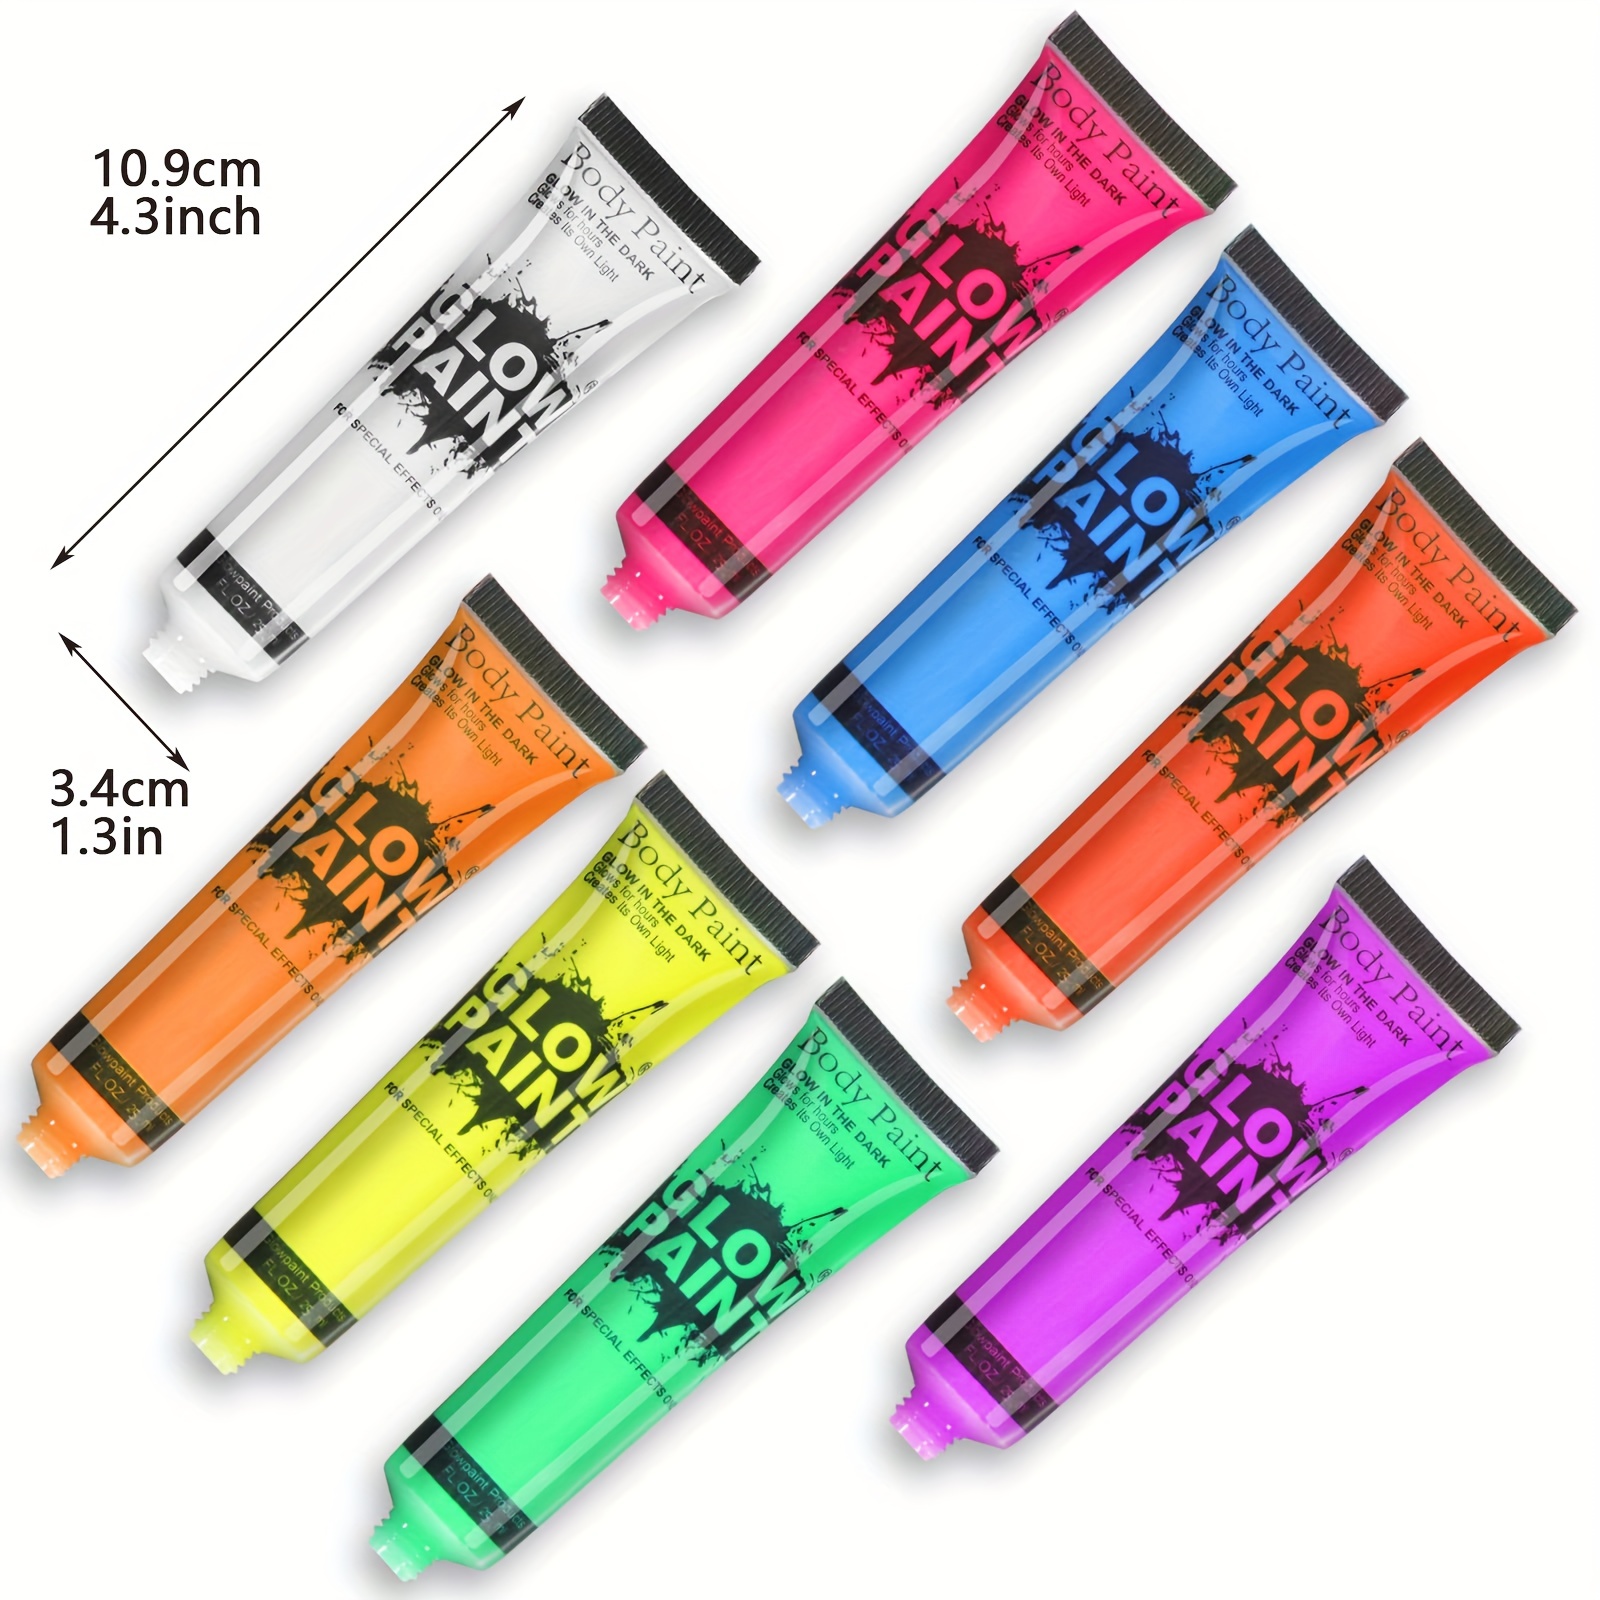 8 Pcs Glow In The Dark Body And Face Paint, Blacklight Neon Body